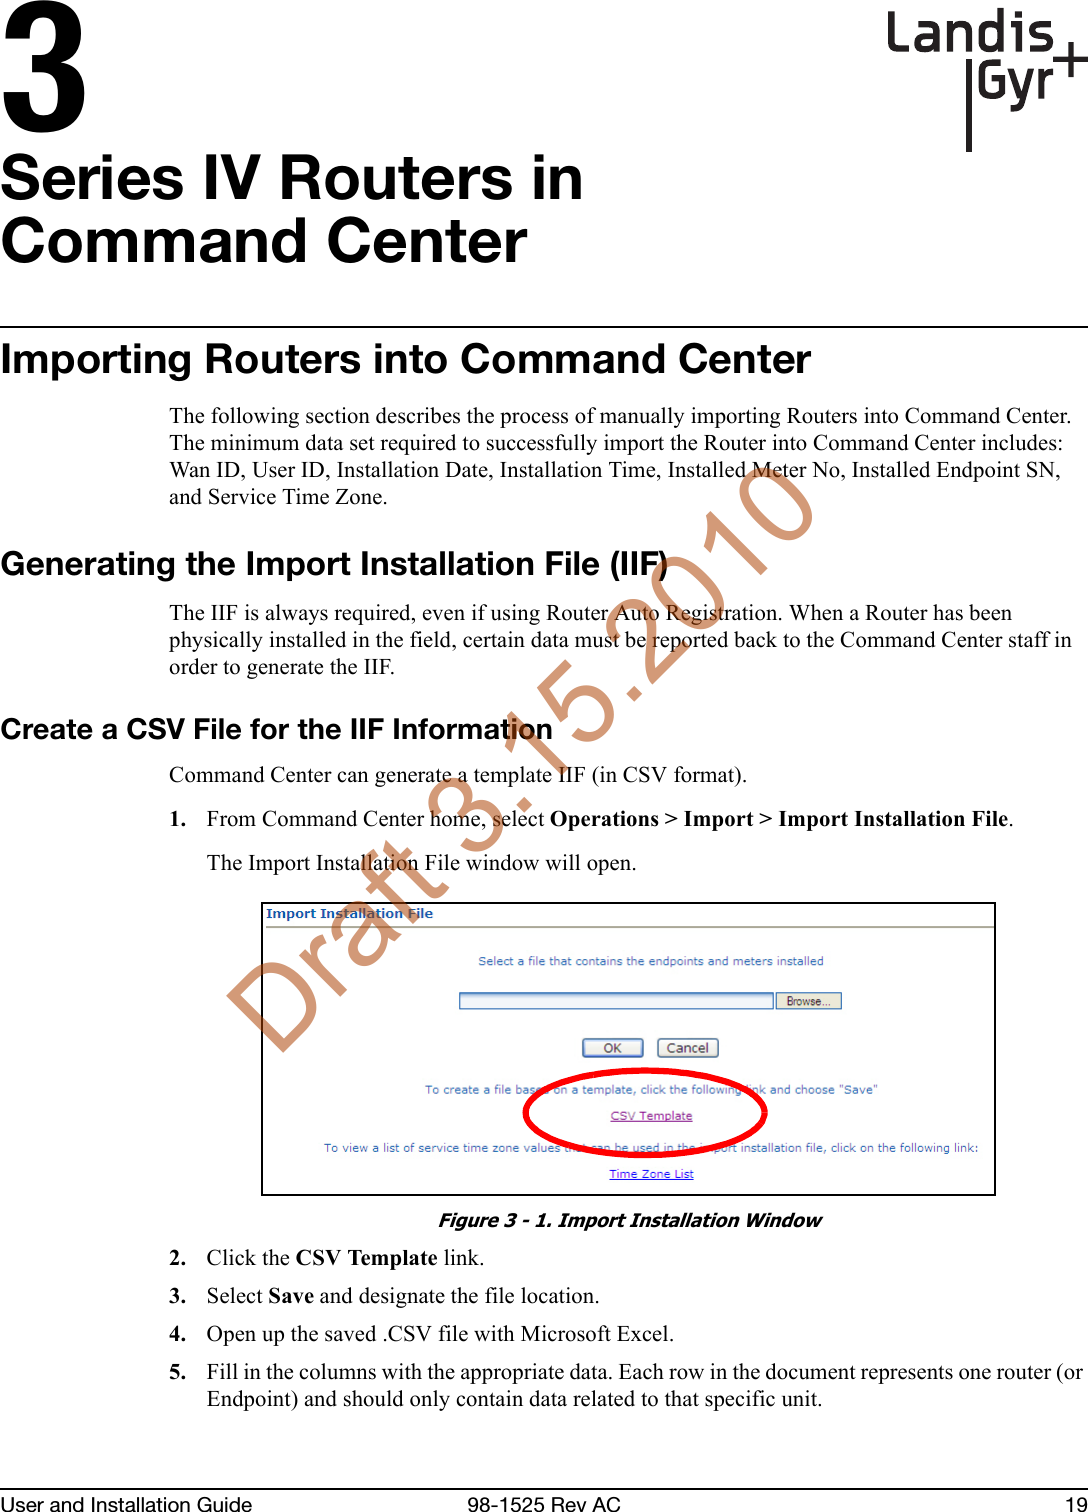 3User and Installation Guide 98-1525 Rev AC 19Series IV Routers inCommand CenterImporting Routers into Command CenterThe following section describes the process of manually importing Routers into Command Center. The minimum data set required to successfully import the Router into Command Center includes: Wan ID, User ID, Installation Date, Installation Time, Installed Meter No, Installed Endpoint SN, and Service Time Zone.Generating the Import Installation File (IIF)The IIF is always required, even if using Router Auto Registration. When a Router has been physically installed in the field, certain data must be reported back to the Command Center staff in order to generate the IIF.Create a CSV File for the IIF InformationCommand Center can generate a template IIF (in CSV format).1. From Command Center home, select Operations &gt; Import &gt; Import Installation File. The Import Installation File window will open.Figure 3 - 1. Import Installation Window2. Click the CSV Template link.3. Select Save and designate the file location.4. Open up the saved .CSV file with Microsoft Excel.5. Fill in the columns with the appropriate data. Each row in the document represents one router (or Endpoint) and should only contain data related to that specific unit.Draft 3.15.2010